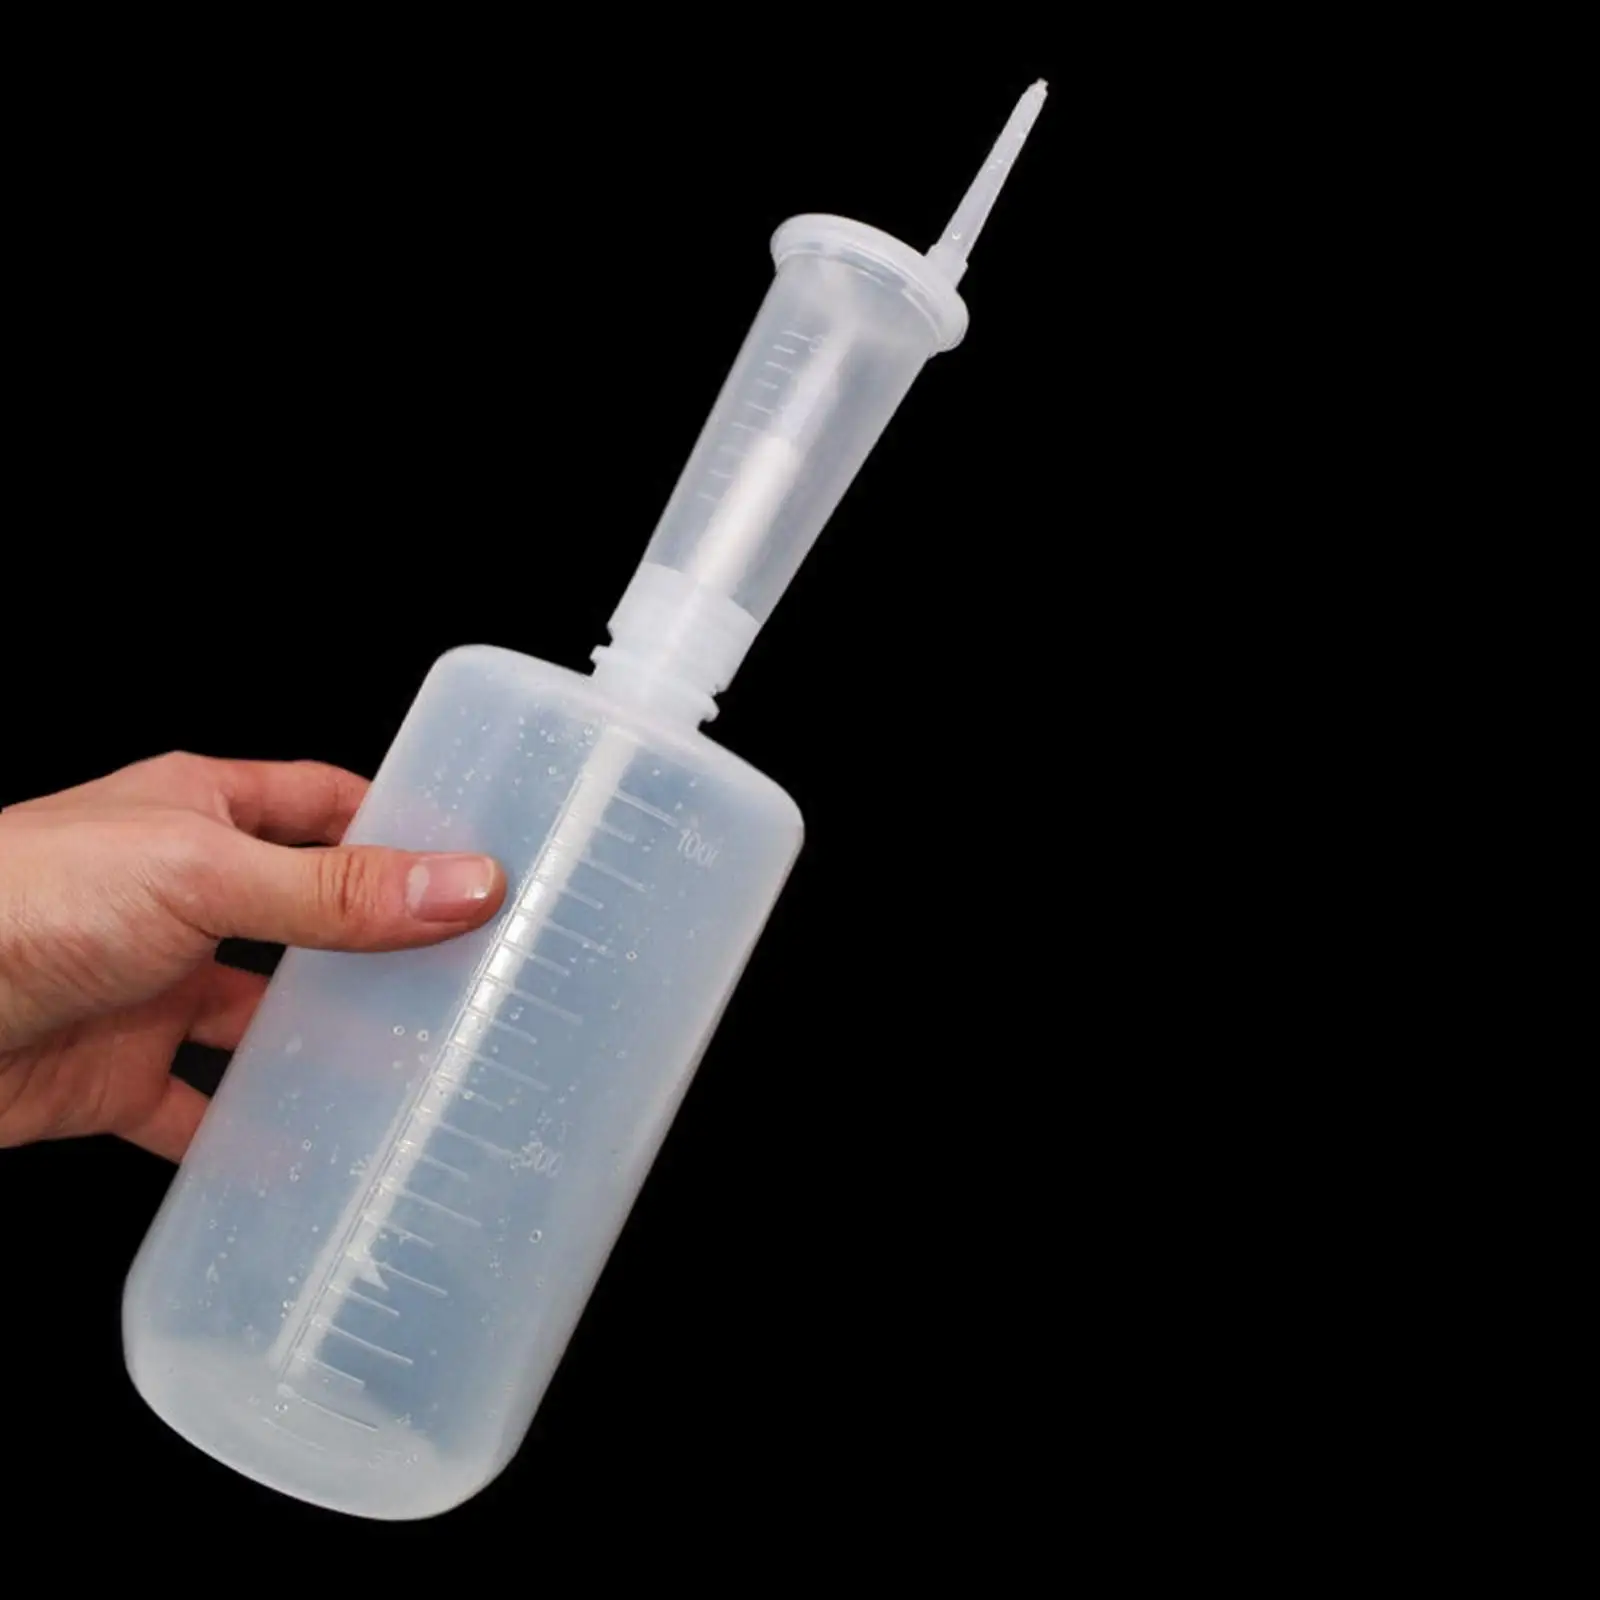 Oxalic Acid Dosage Syringe for Beekeeping Clear Squeeze Bottle Durable